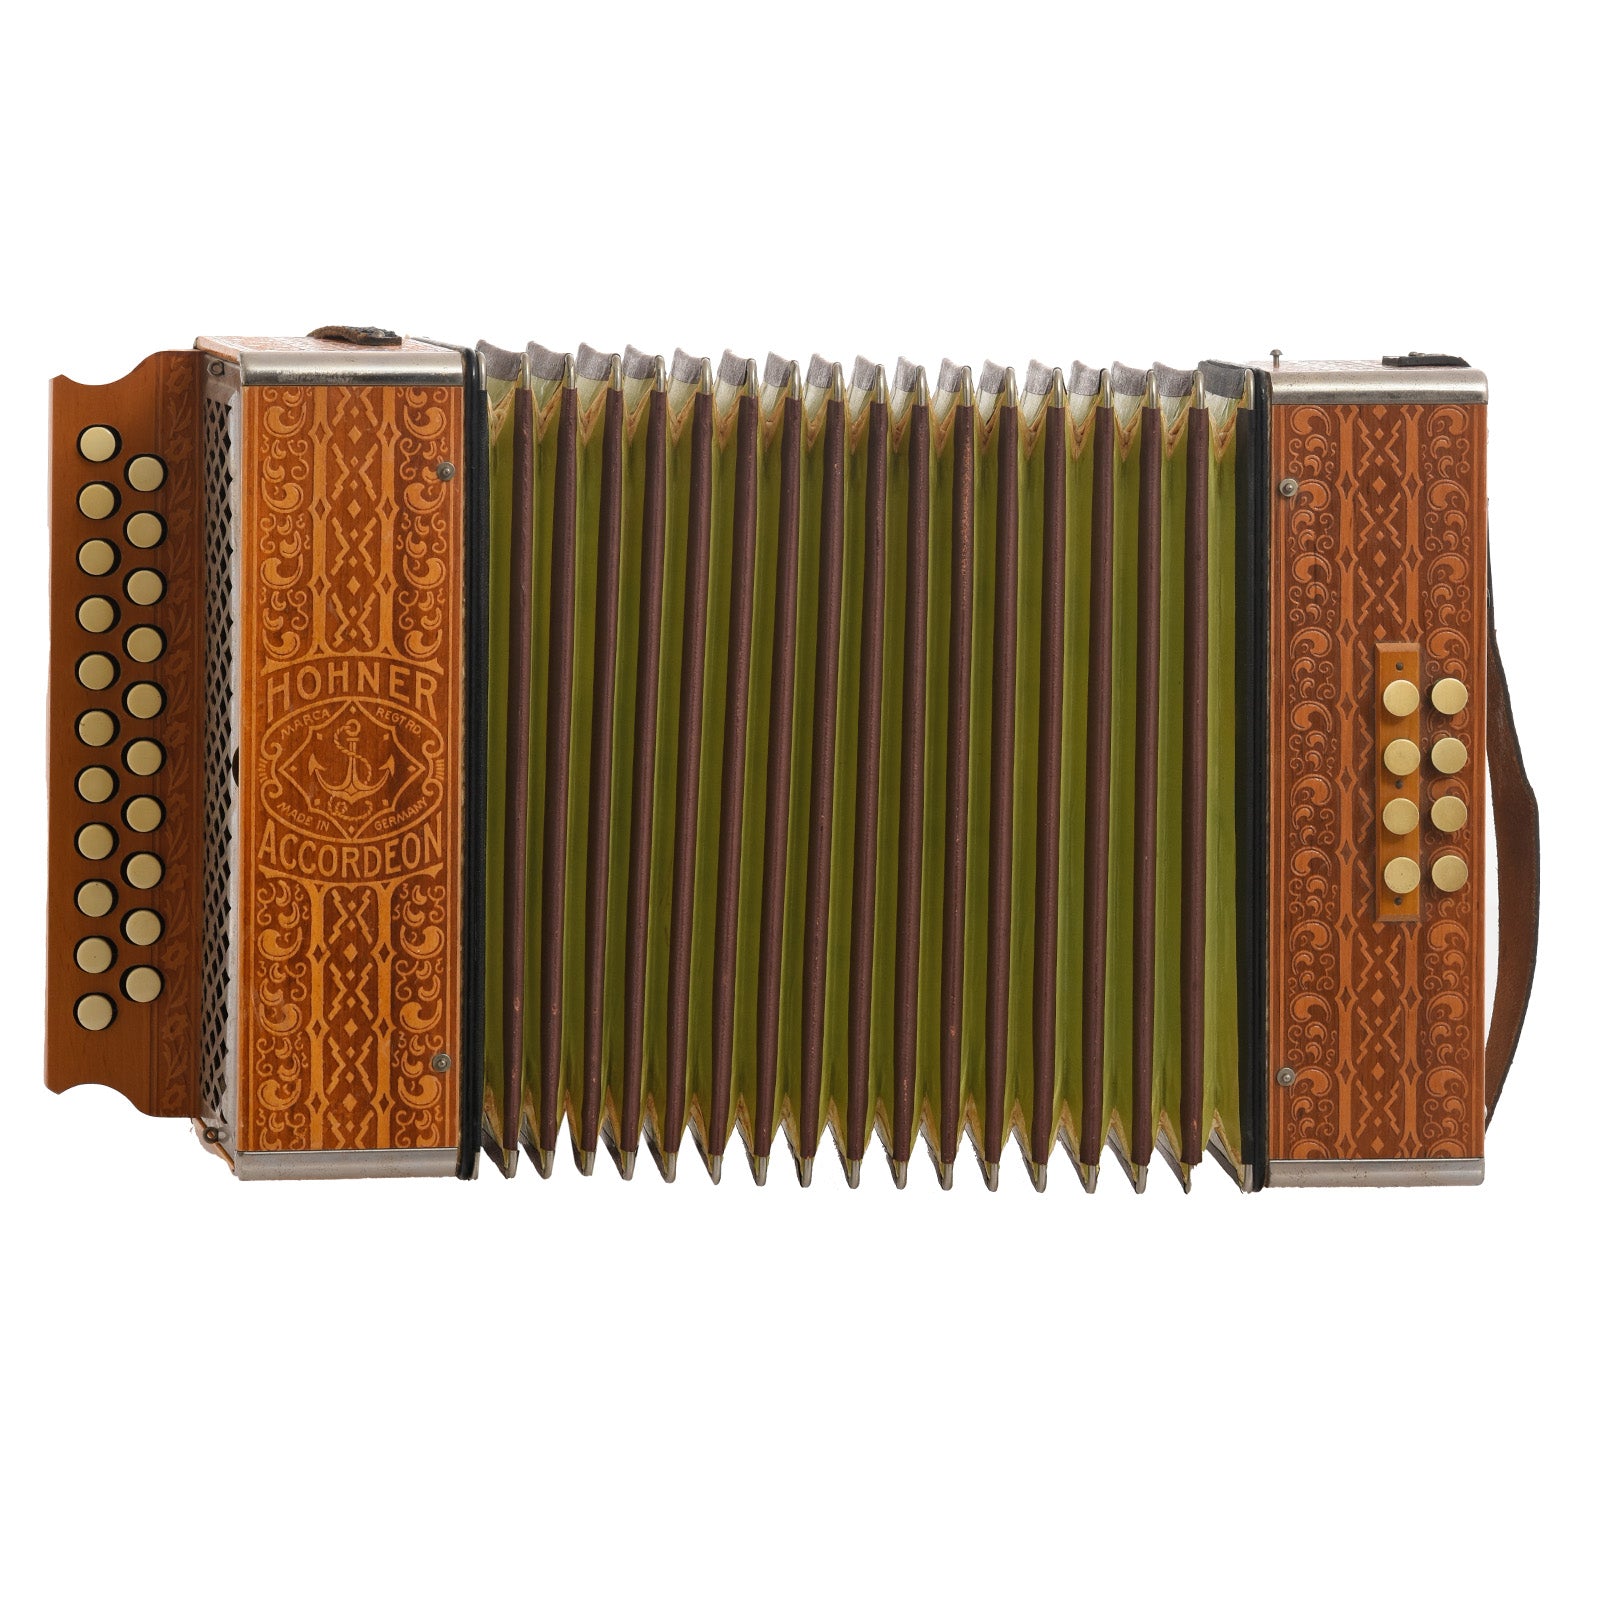 Front showing bellows of Hohner Button Accordion (1920s)